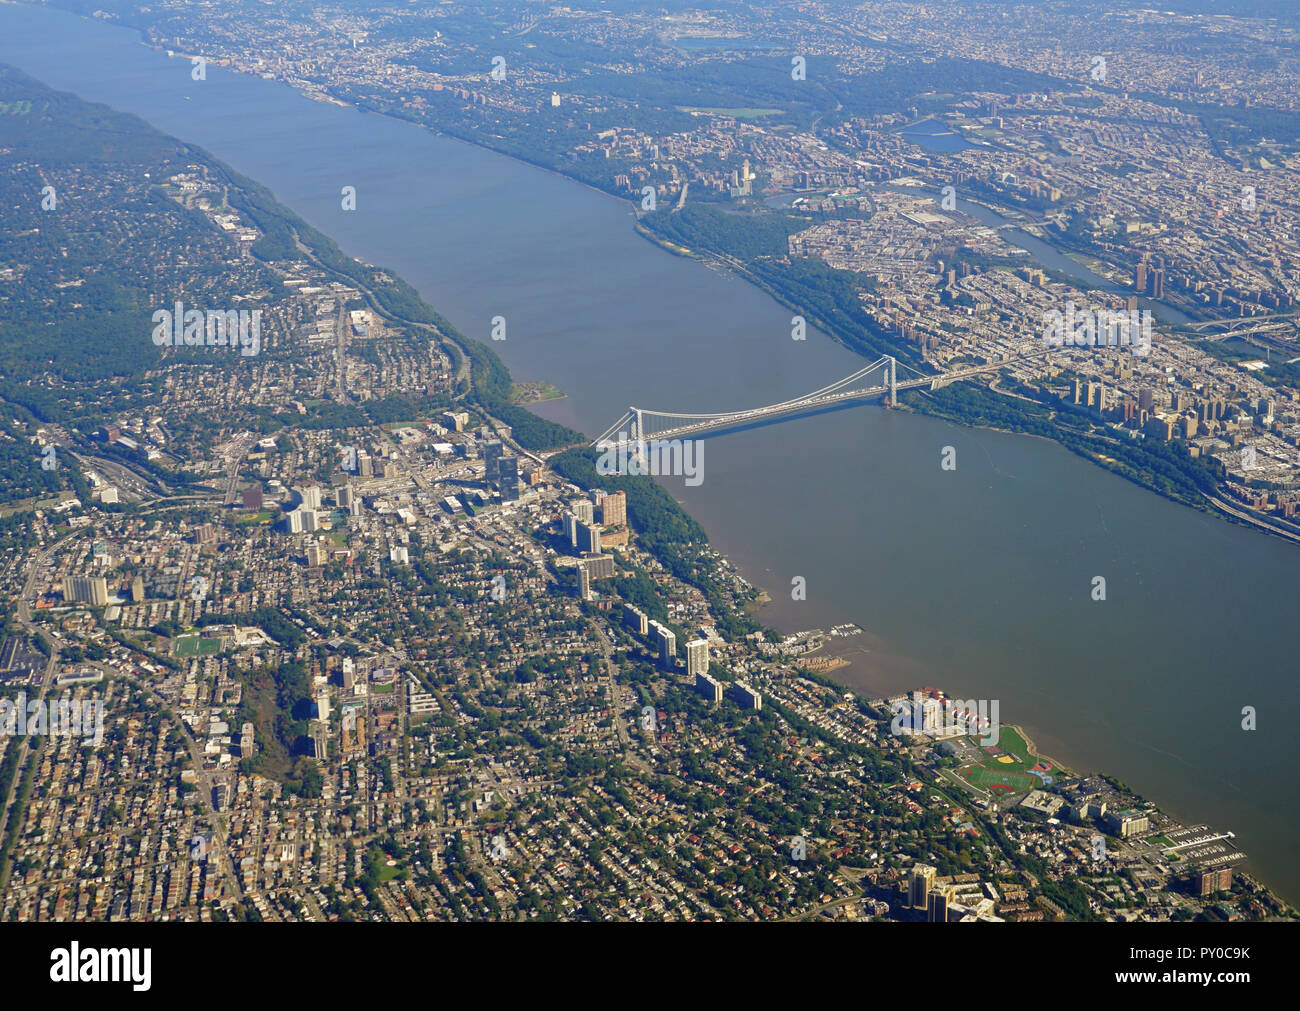 Aerial view of the George Washington Bridge over the Hudson River between New York and New Jersey Stock Photo